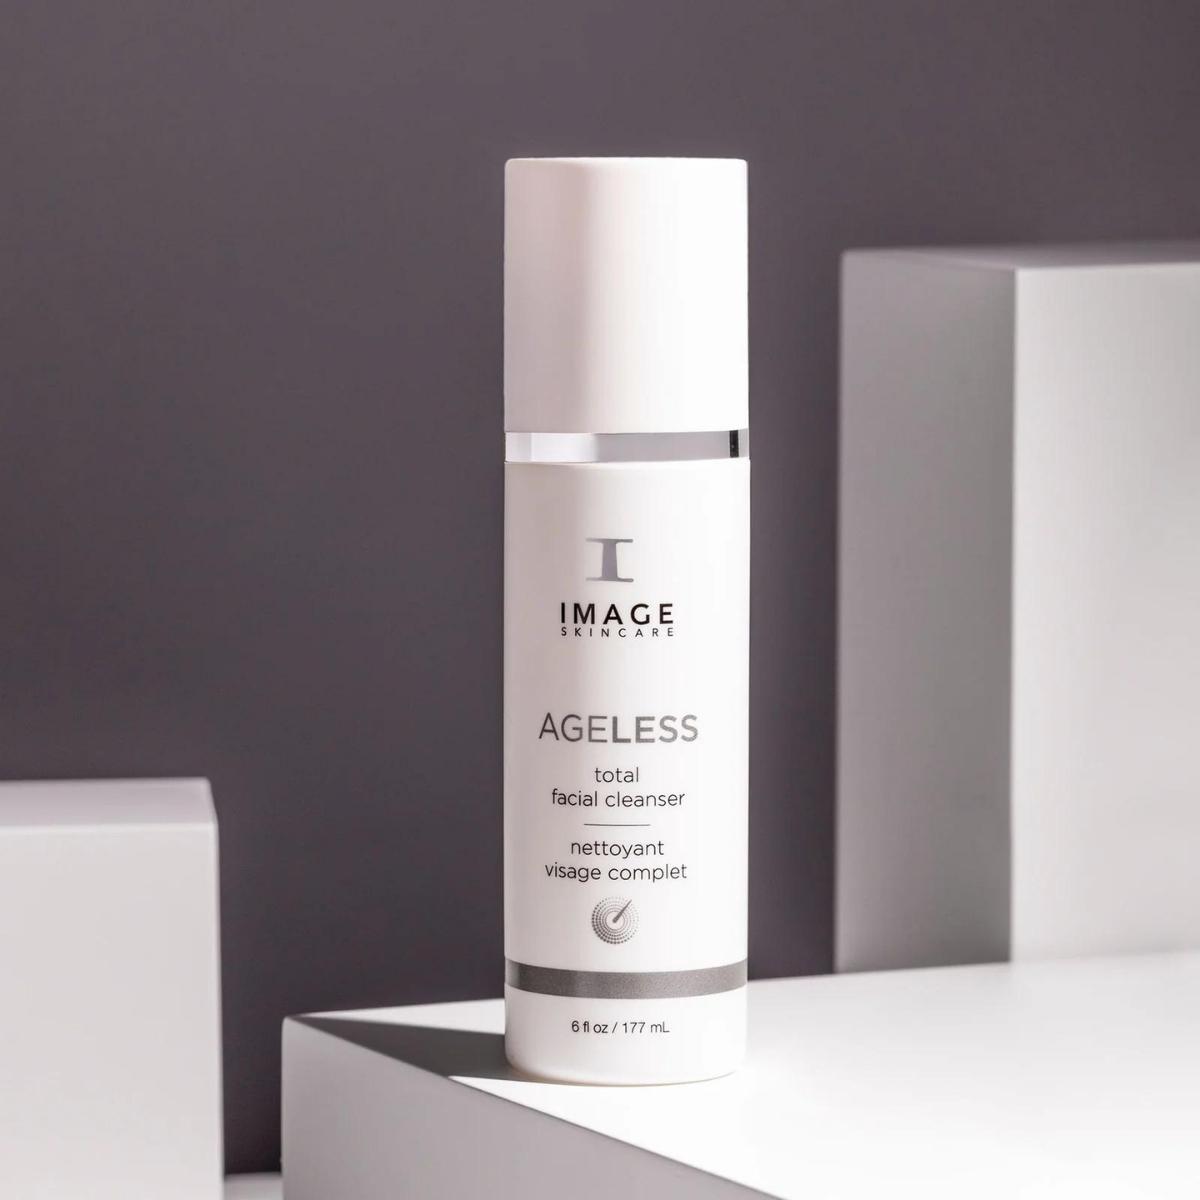 IMAGE Skincare Ageless Total Facial Cleanser lifestyle 